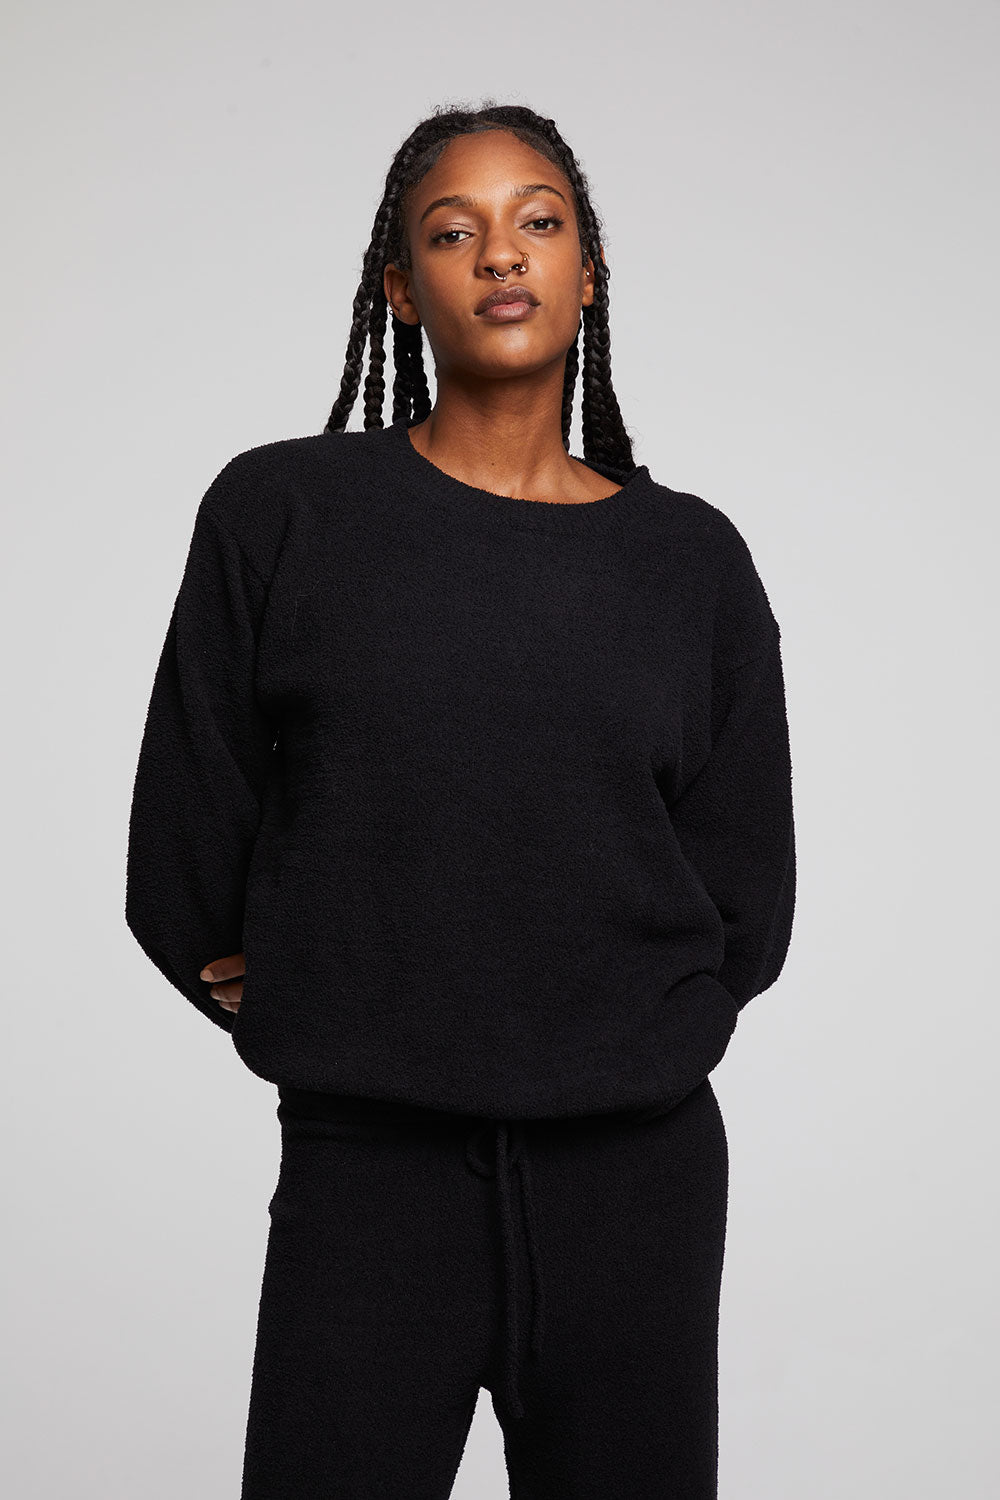 Frankie Licorice Pullover WOMENS chaserbrand